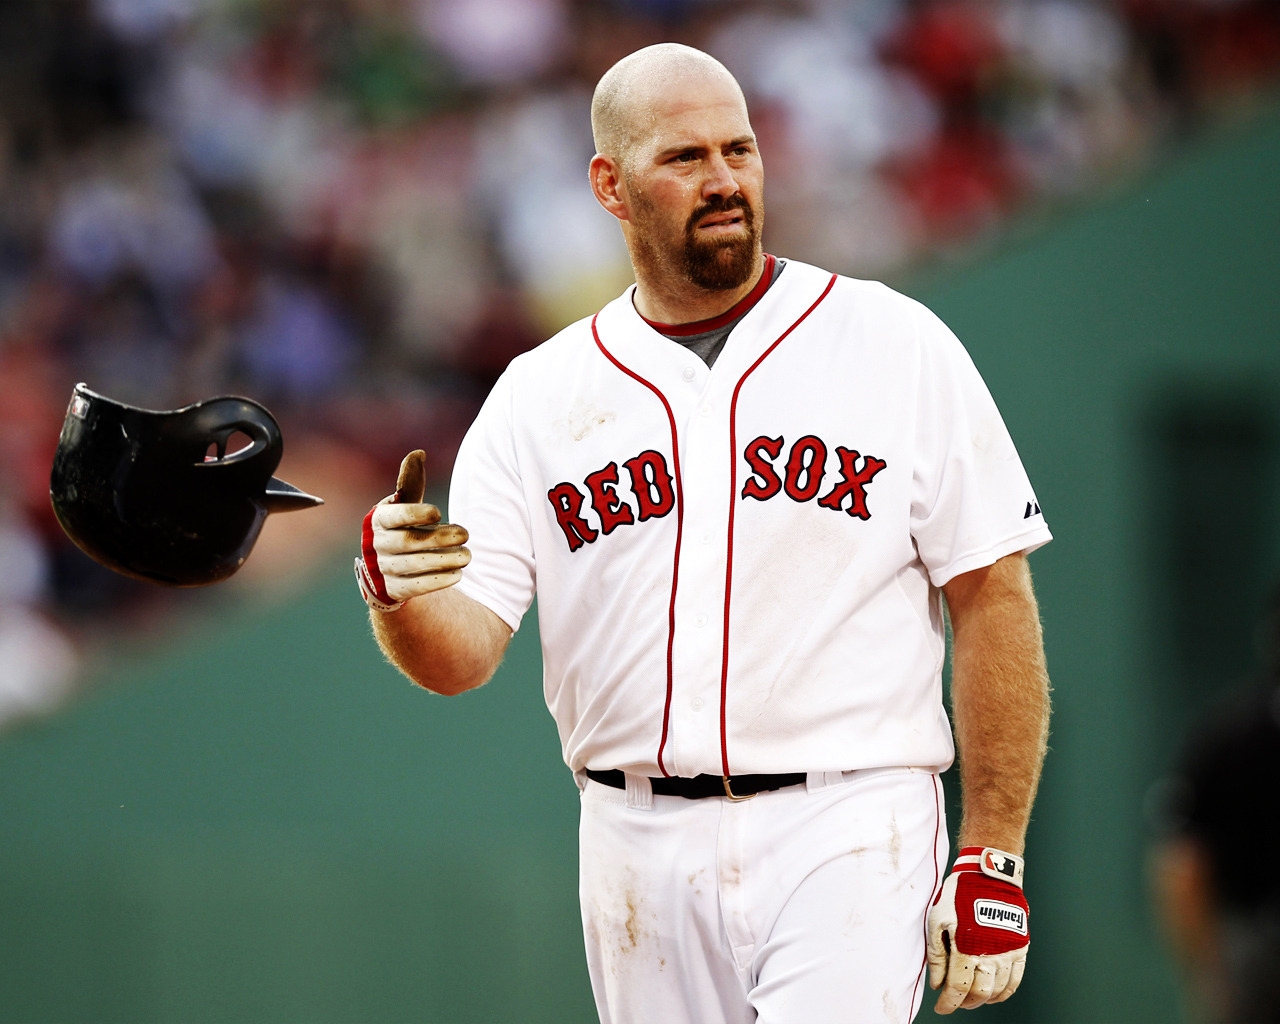 Kevin Youkilis for 1280 x 1024 resolution